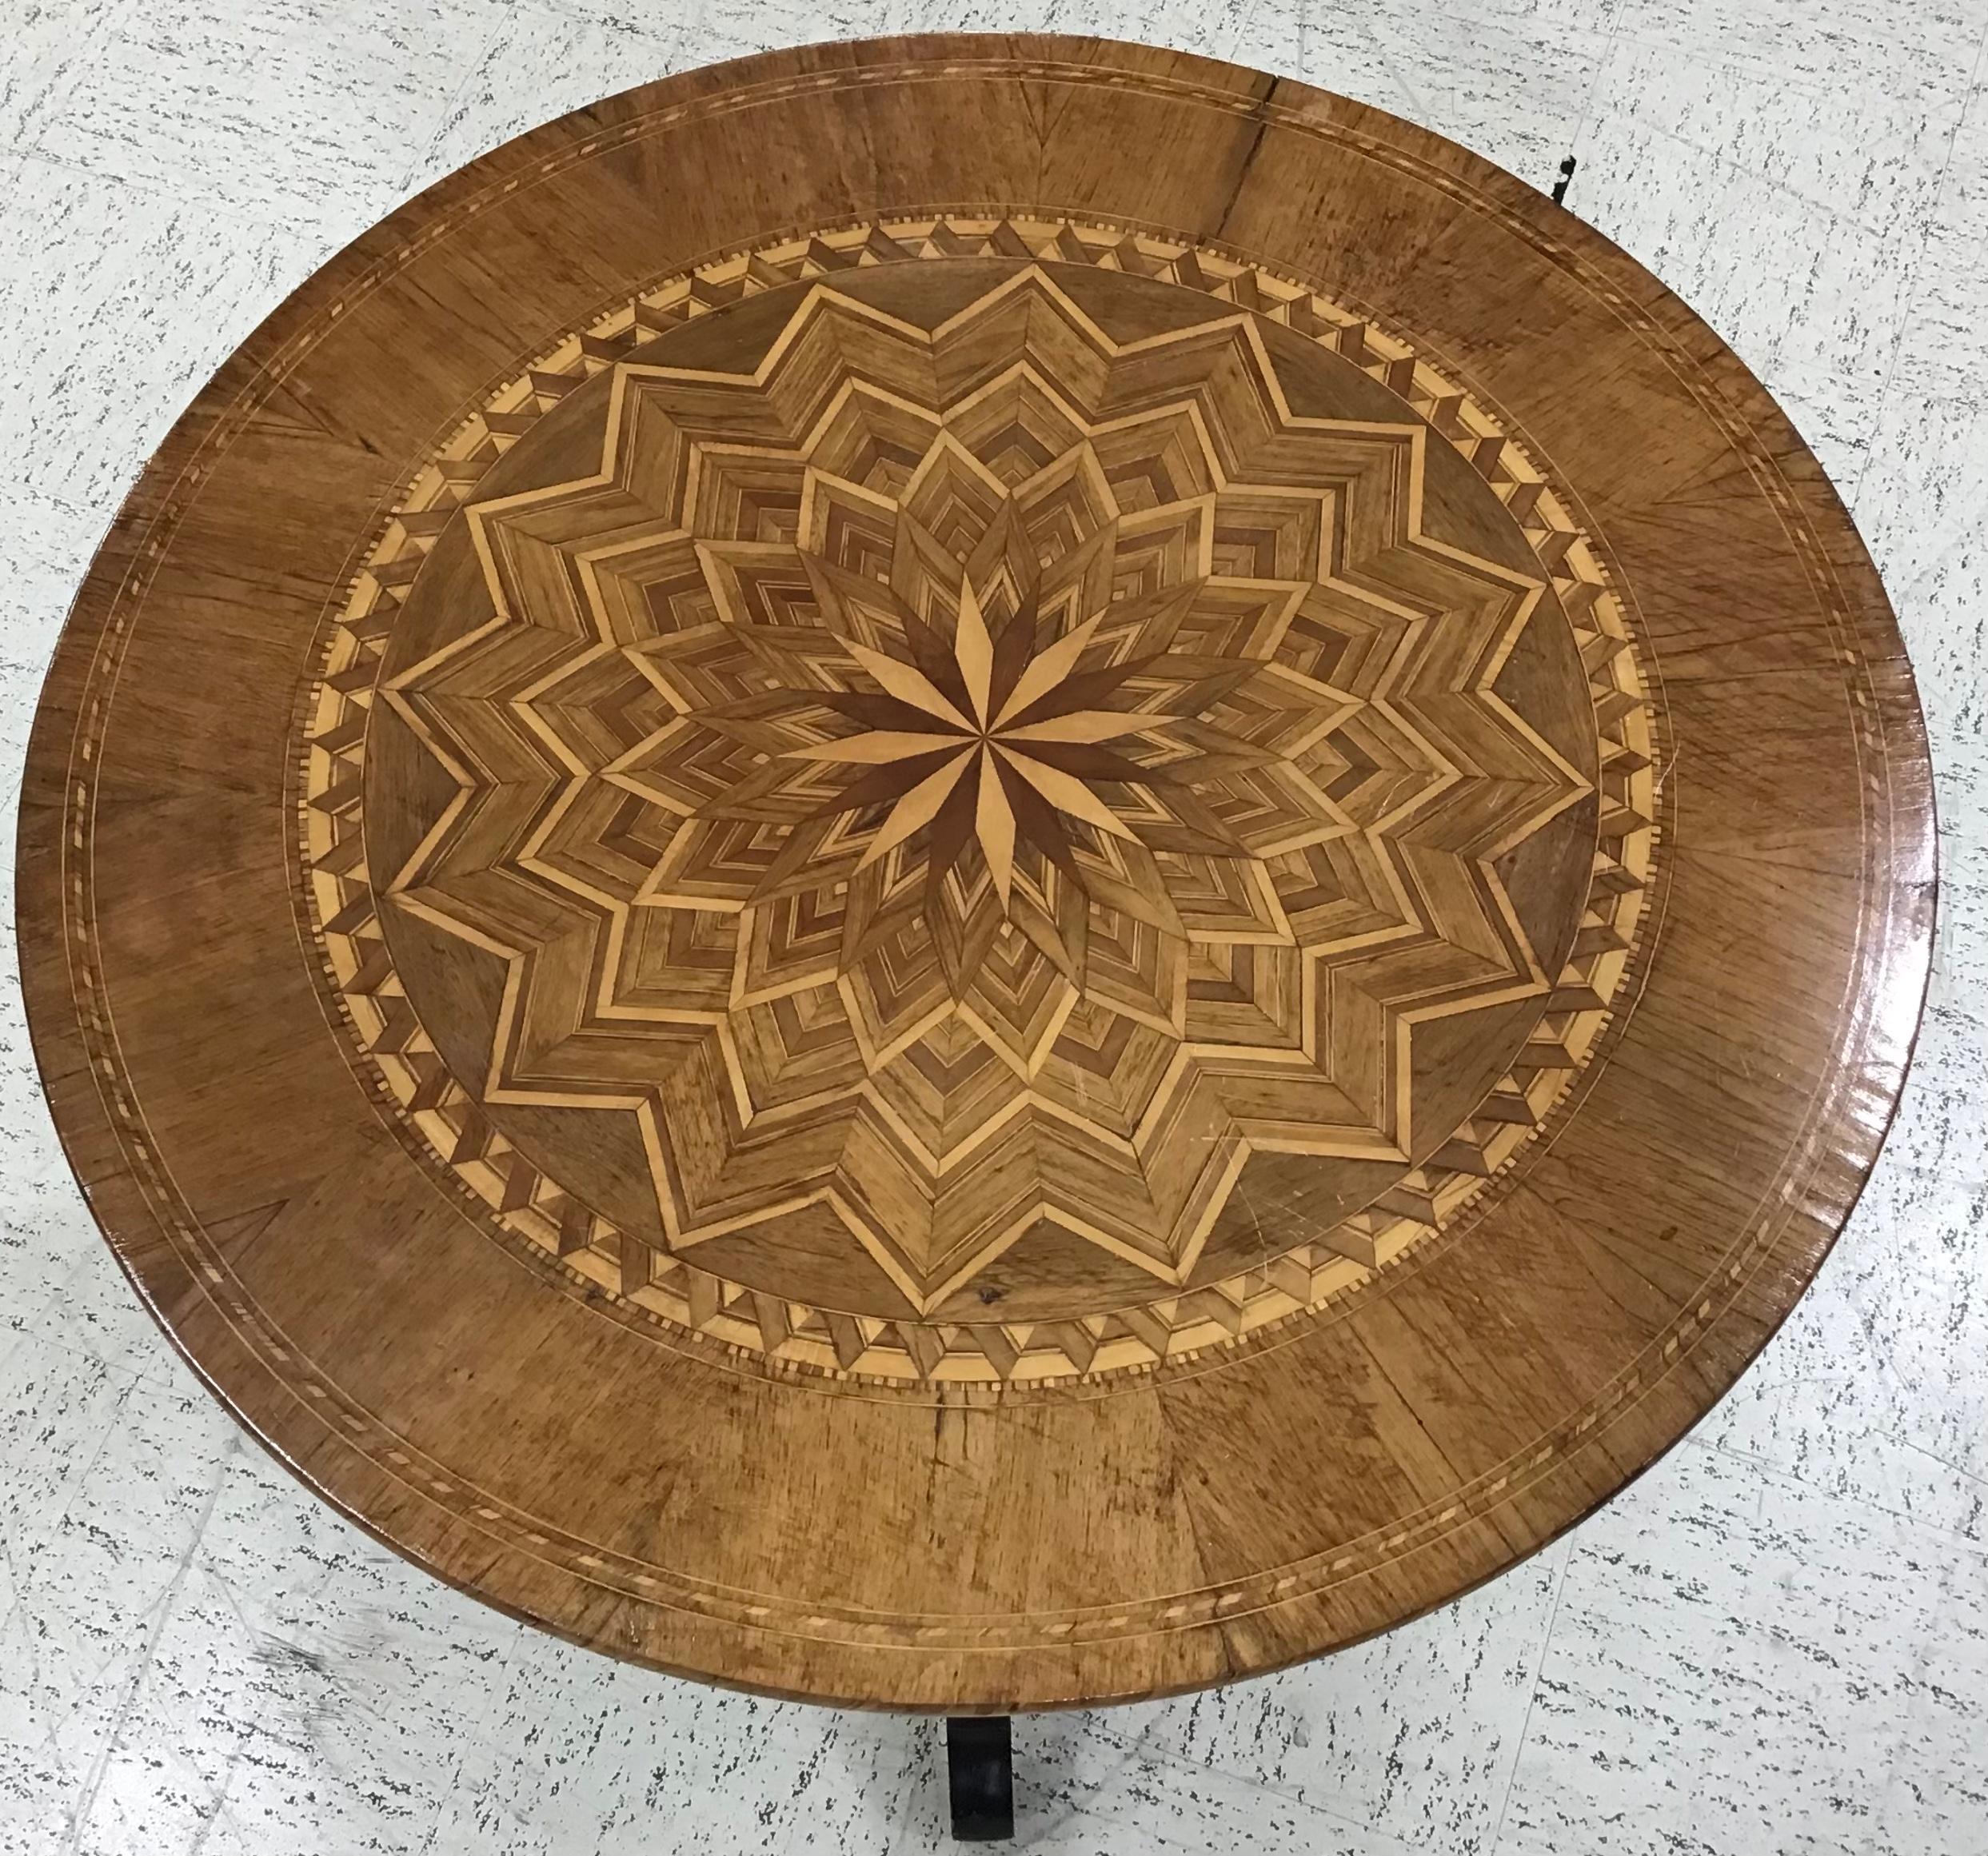 19th century Italian side or center table with elaborate marquetry top inlaid with walnut and various fruit woods, typical of Sorrento, Italy. The tripod base also inlaid with geometric patterns.